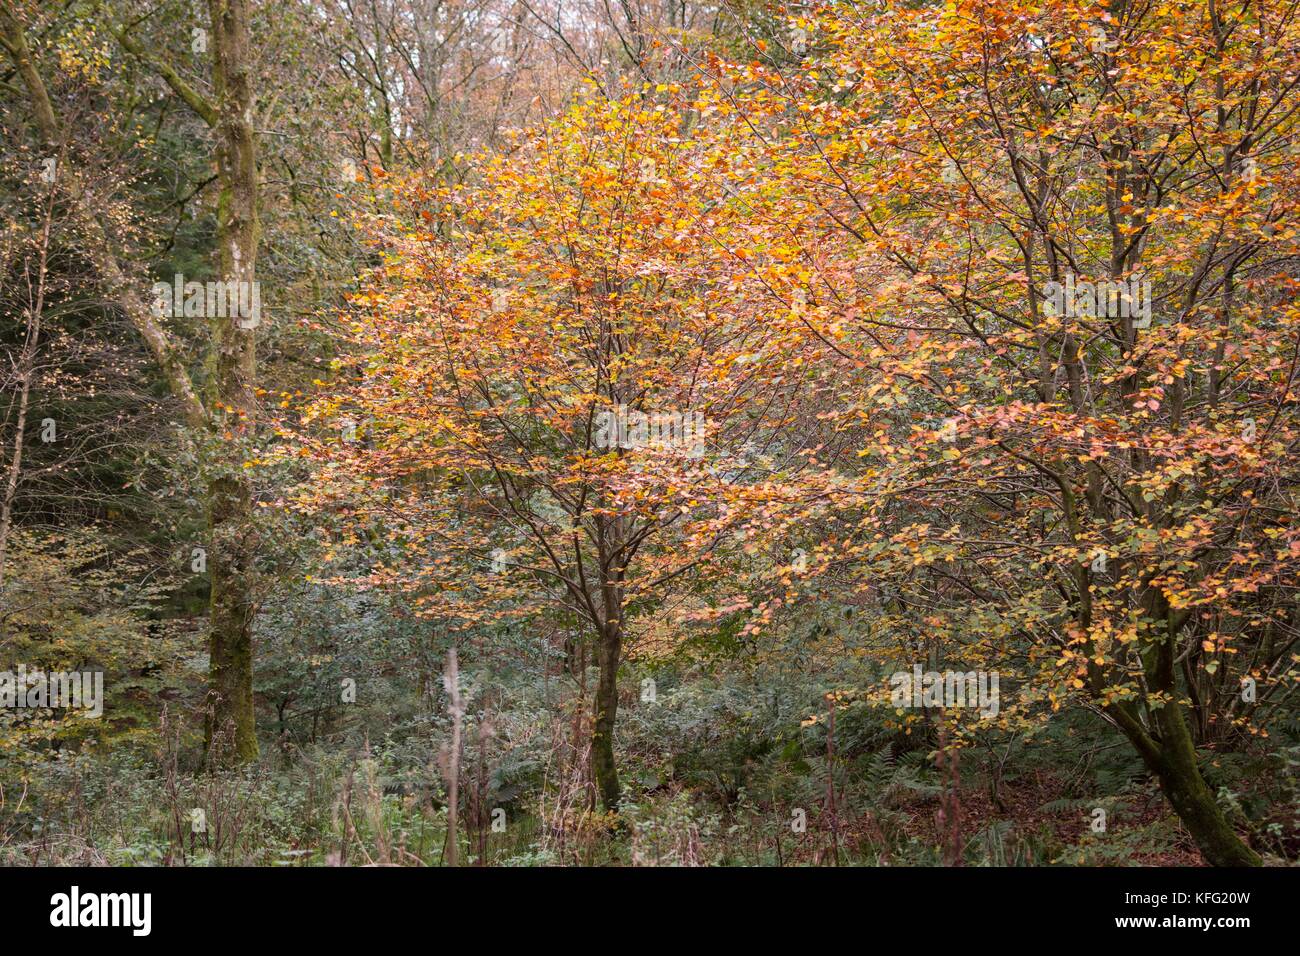 A forest woodland scene where the trees have orange and brown leaves in the Autumn season. Stock Photo